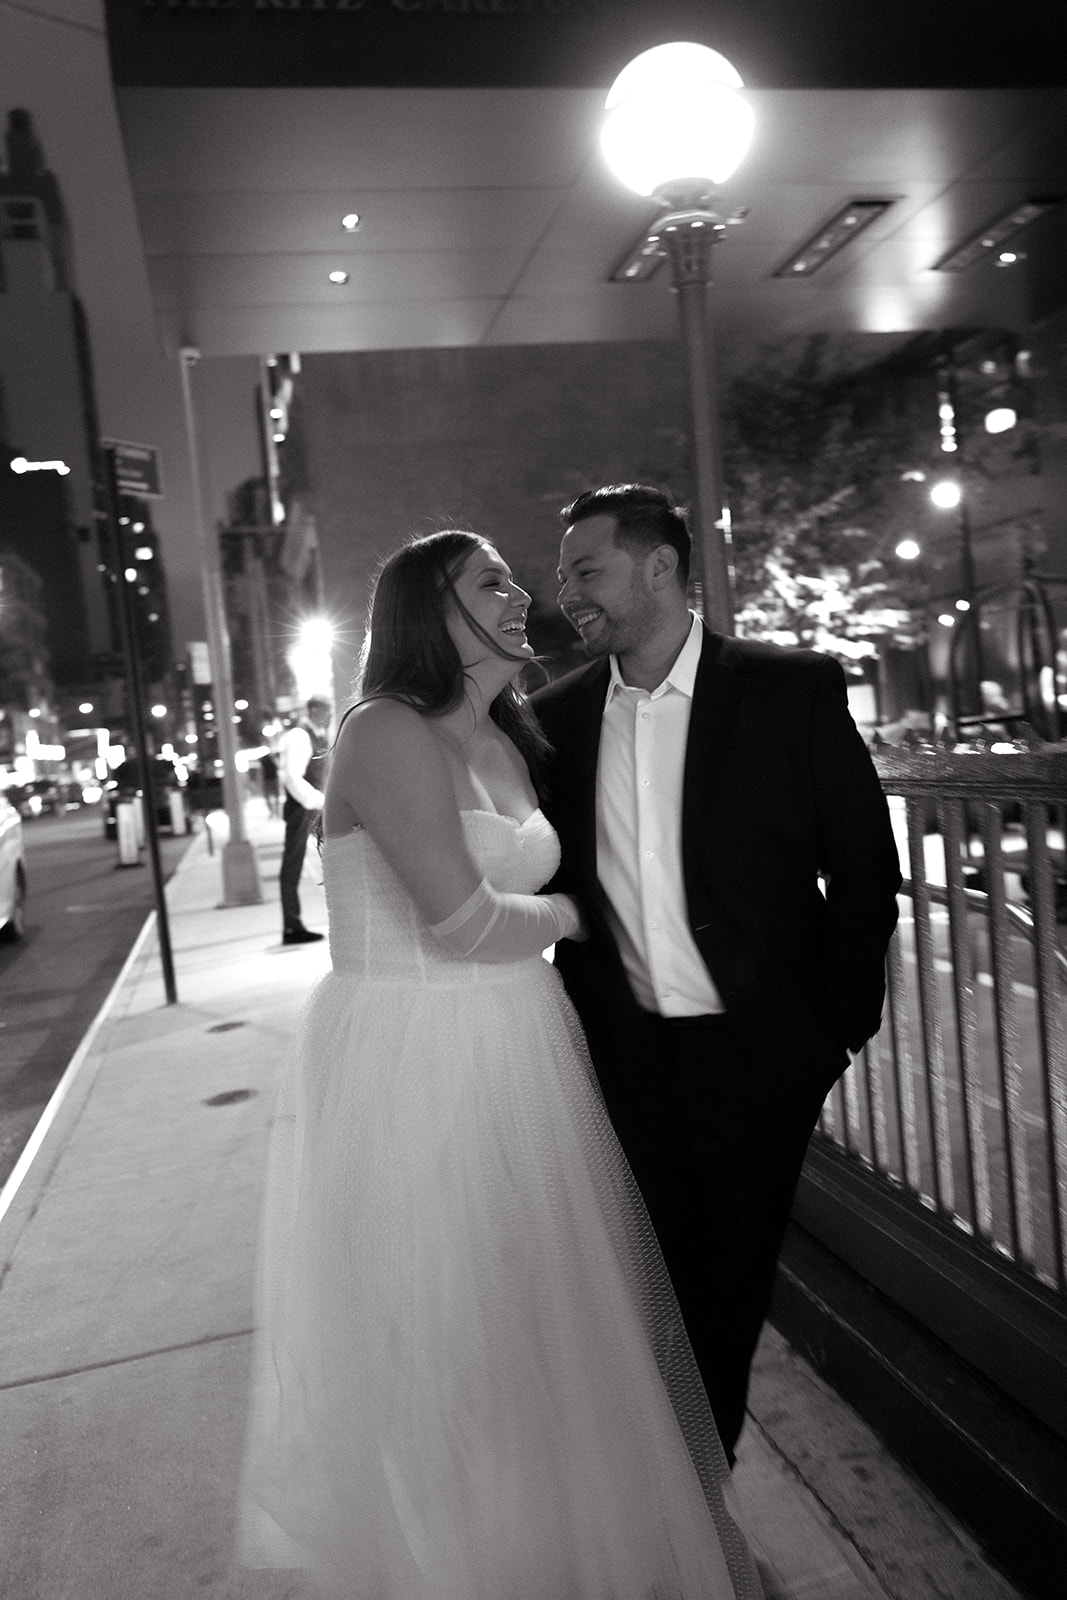 A couple who eloped in NYC walk around the streets at night